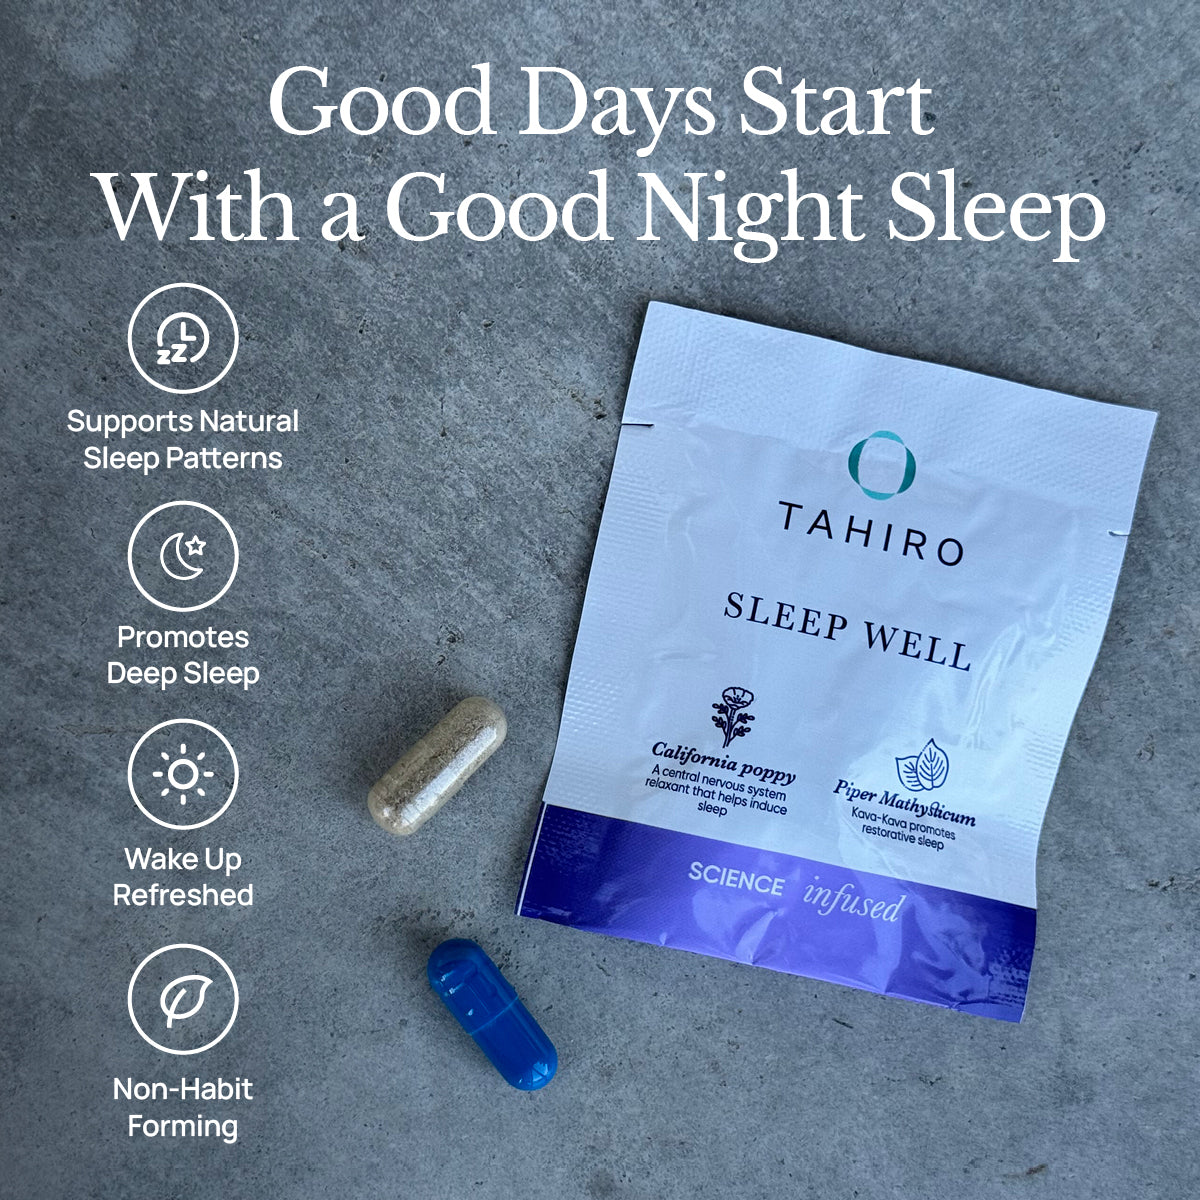 What are the benefits of thairo sleepwell sleeping tablets